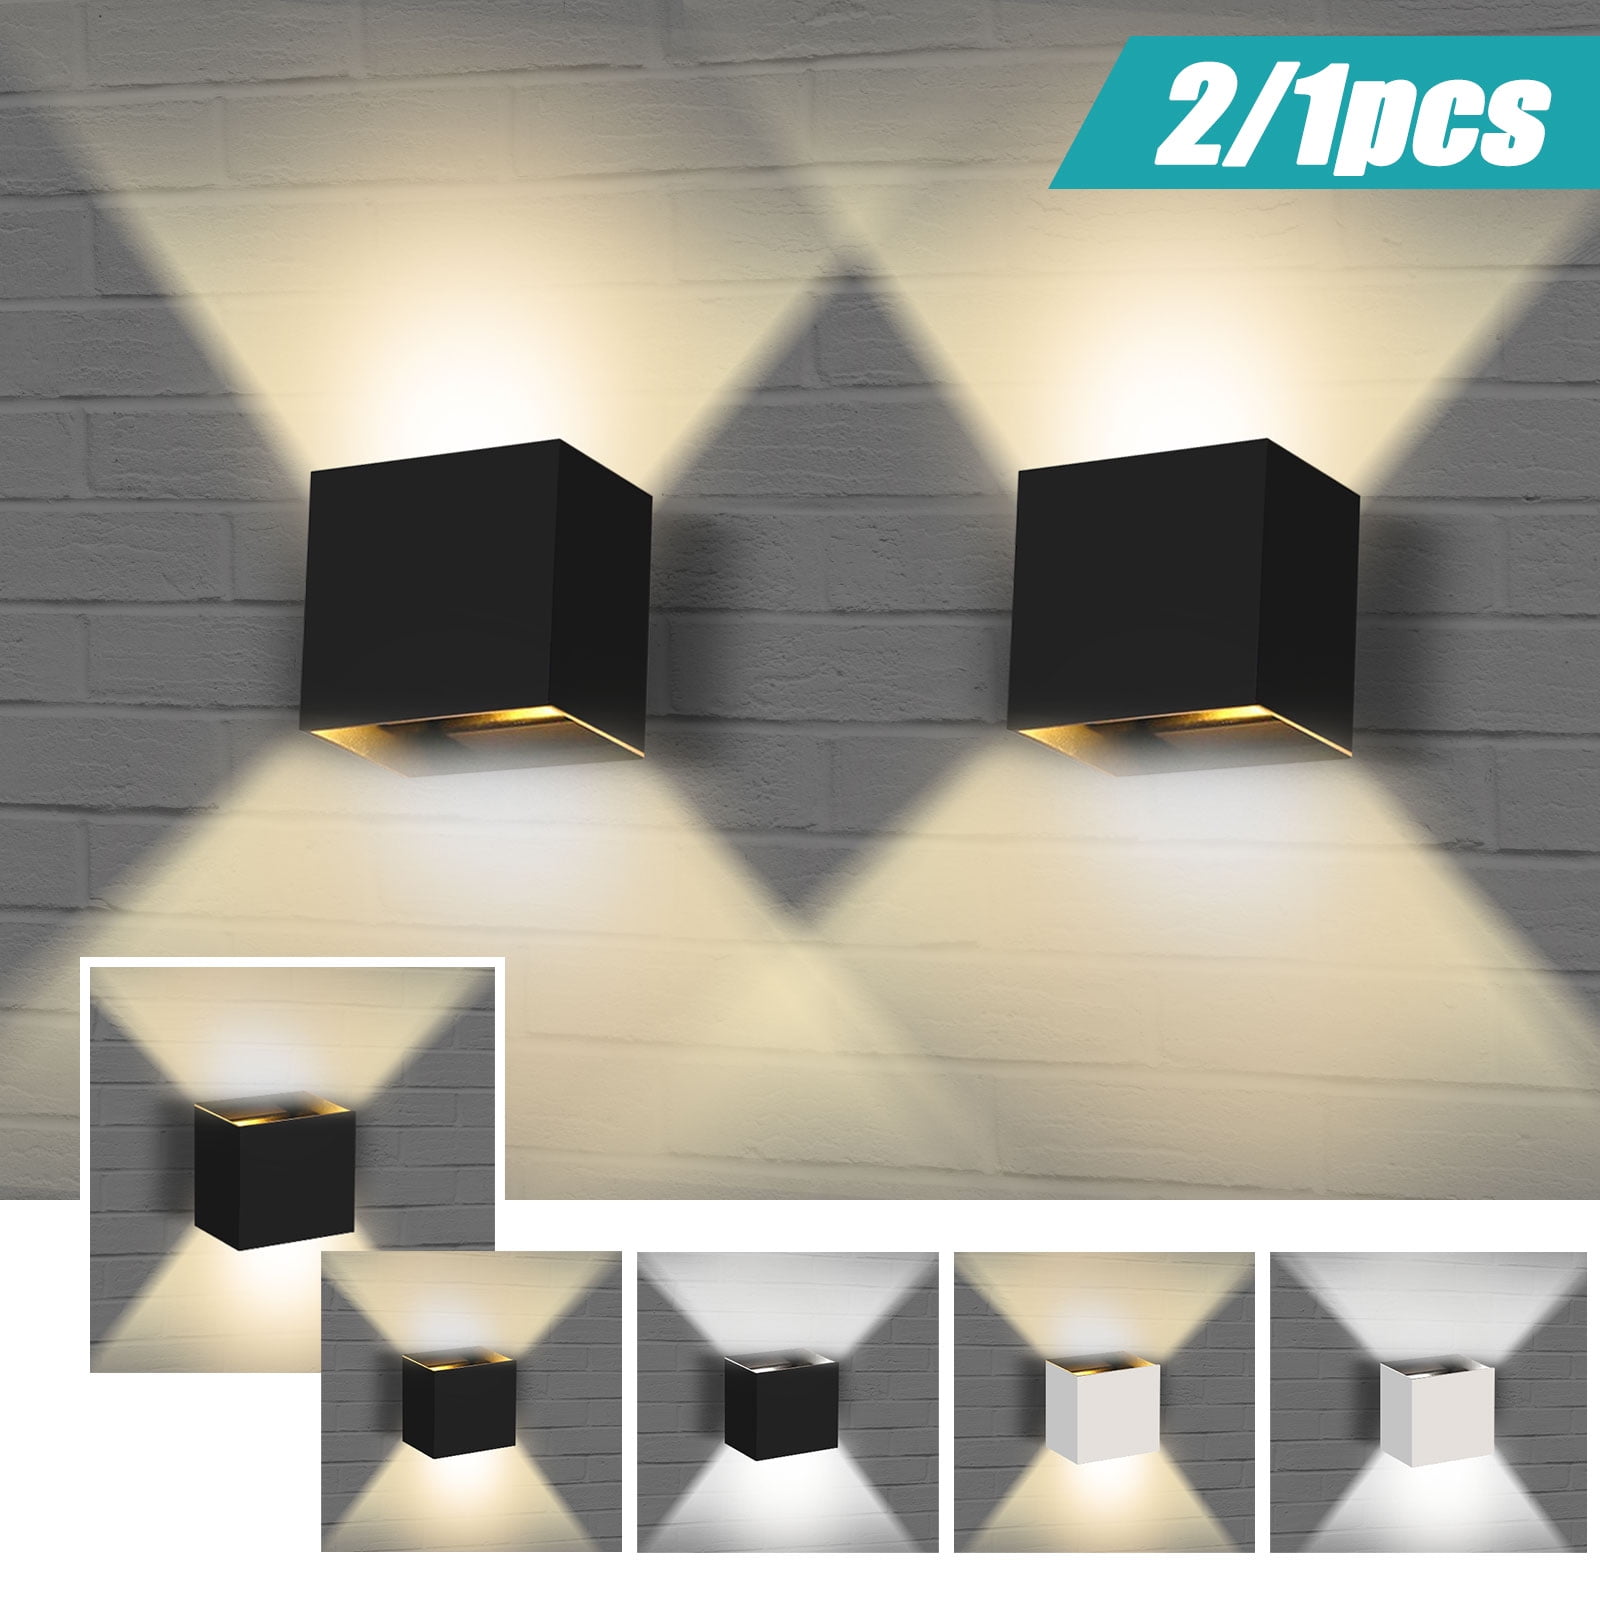 Up/Down 2W/6W LED Wall Mount Light Dimmable/N Crystal Lamp Fixture Corridor Shop 